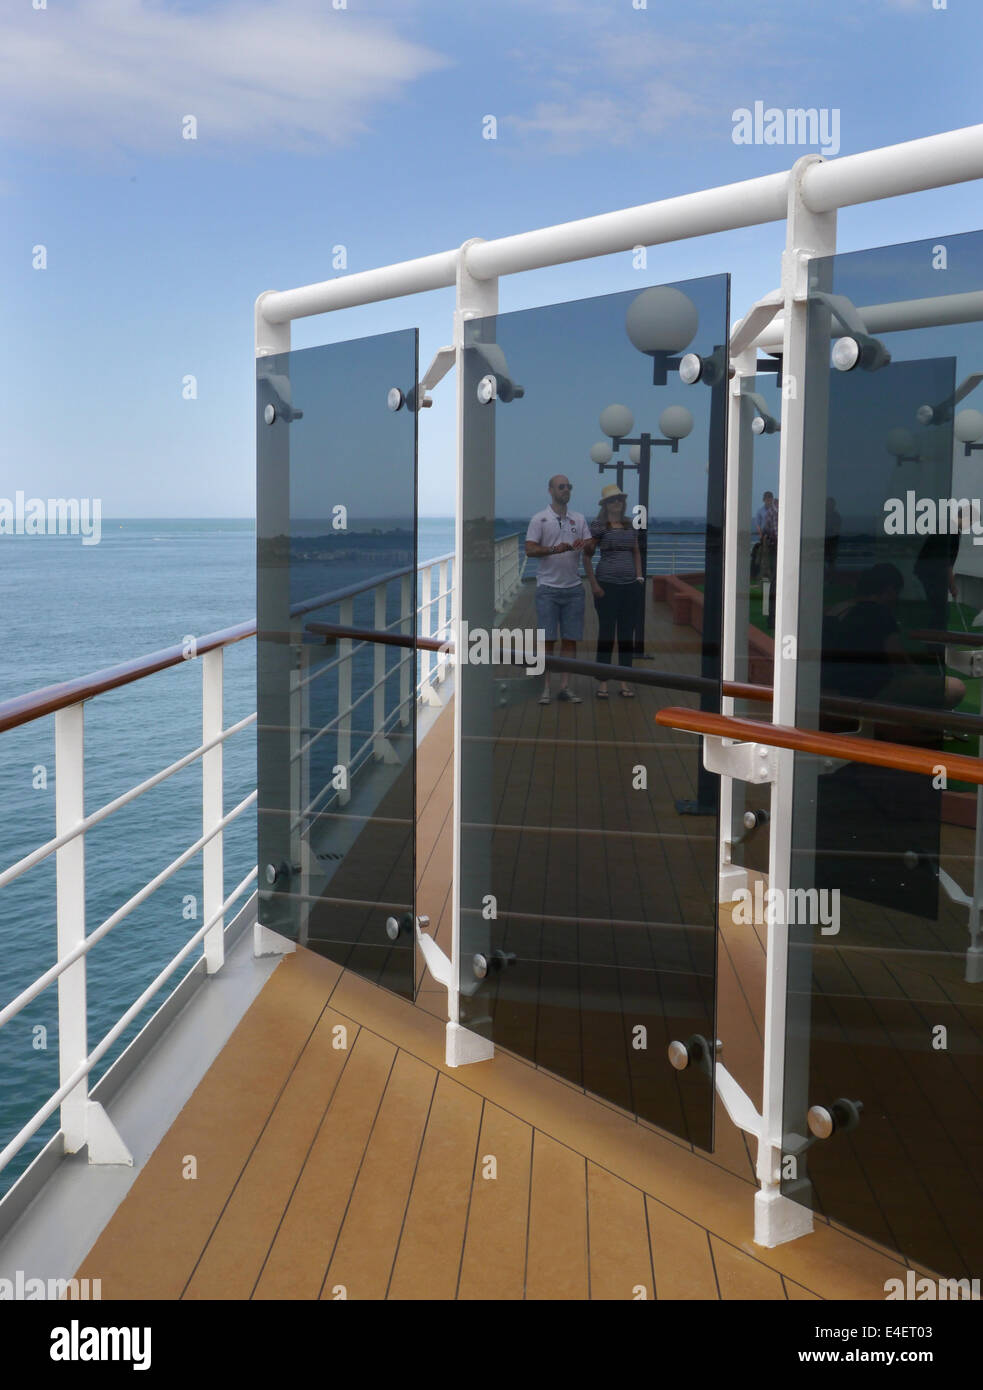 A Cruise Ship Deck With Glass Panels And People In The Distance